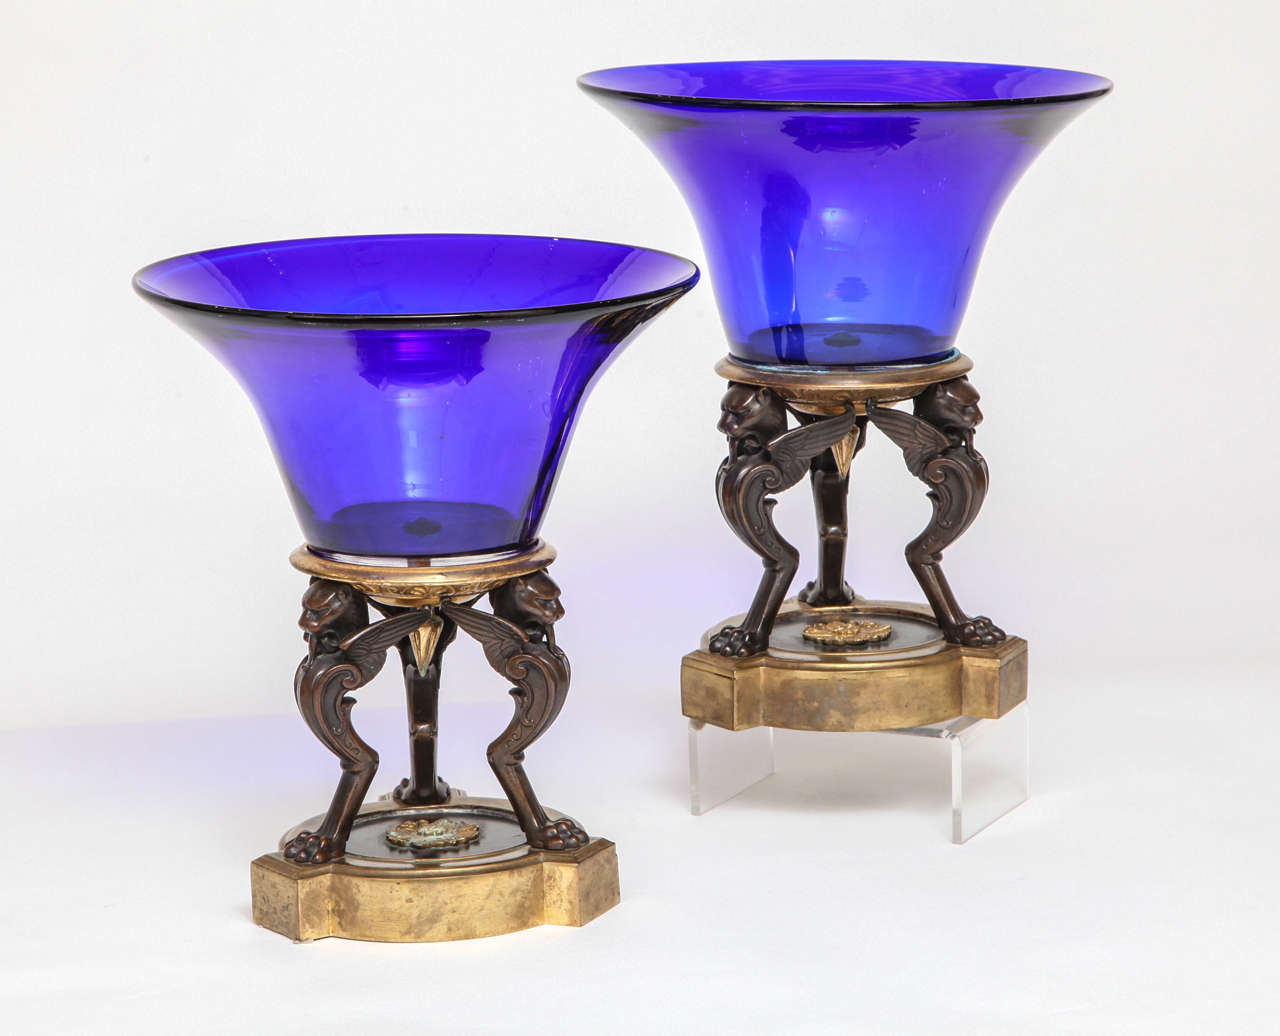 Unusual pair of Antique Russian Empire cobalt blue glass and bronze mounted griffin support centerpieces, the bronze Griffins patinated with gilt bronze bases and accents, mid 1800's